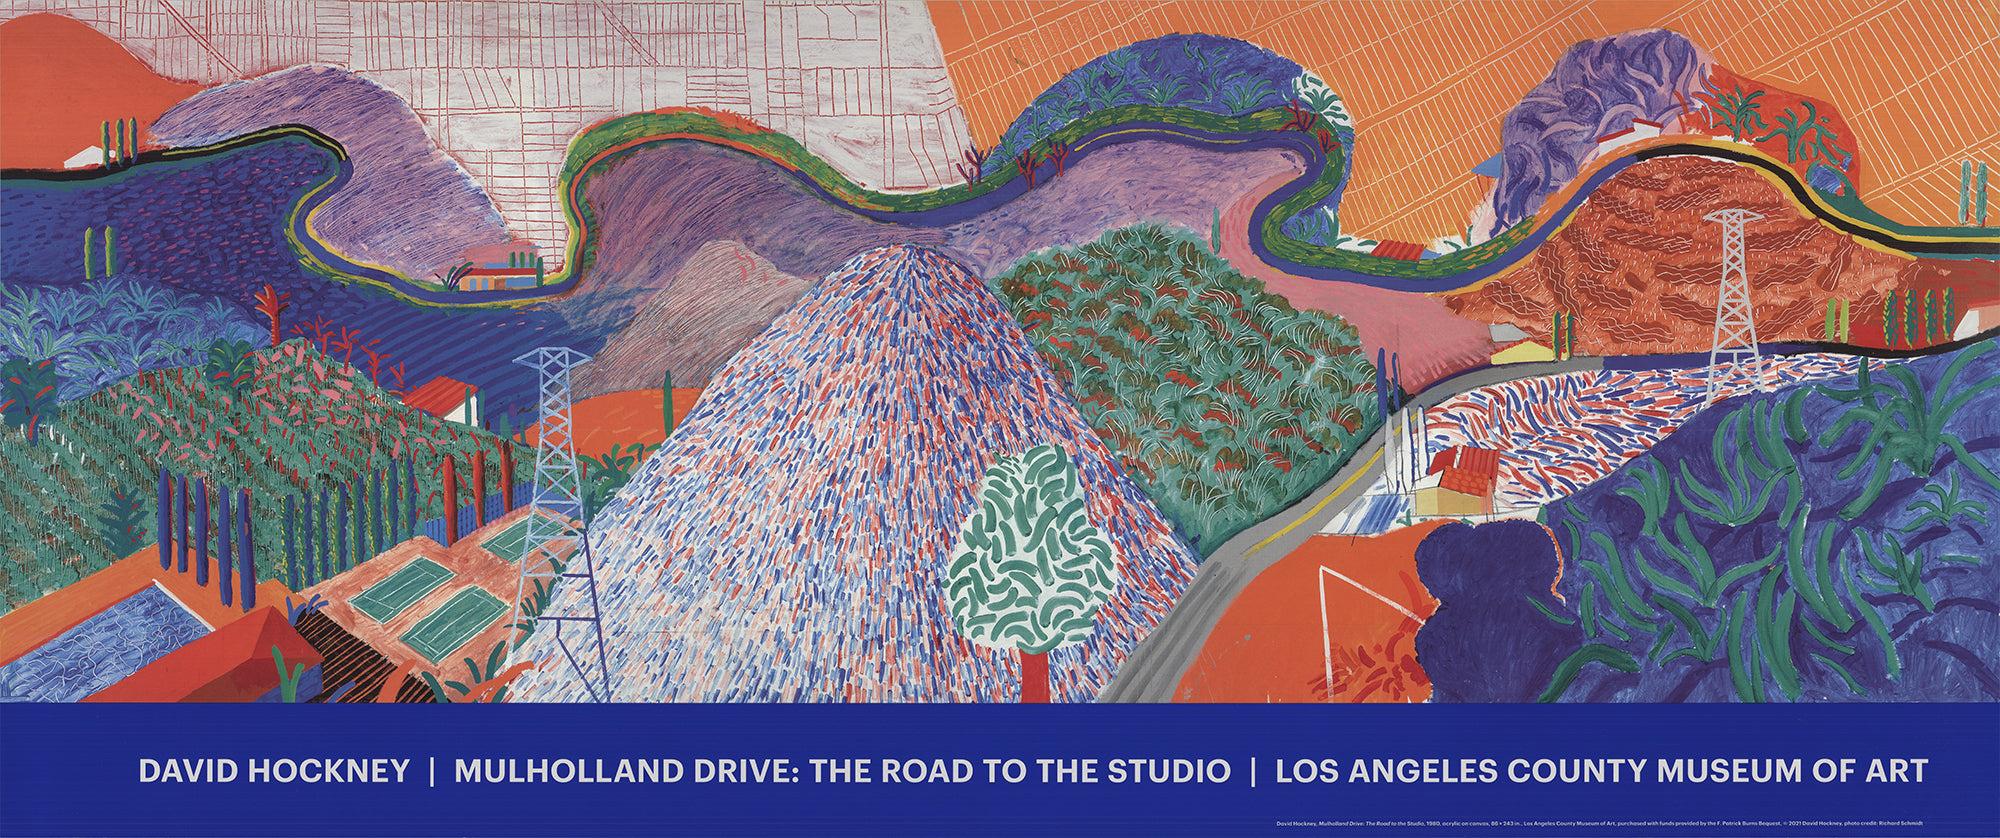 Paper Size: 16 x 38 inches ( 40.64 x 96.52 cm )
Image Size: 13.5 x 38 inches ( 34.29 x 96.52 cm )
Framed: No
Condition: A: Mint

Additional Details: One of Hockney's most famous images- "Mulholland Drive: The Road to the Studio". Exhibition poster